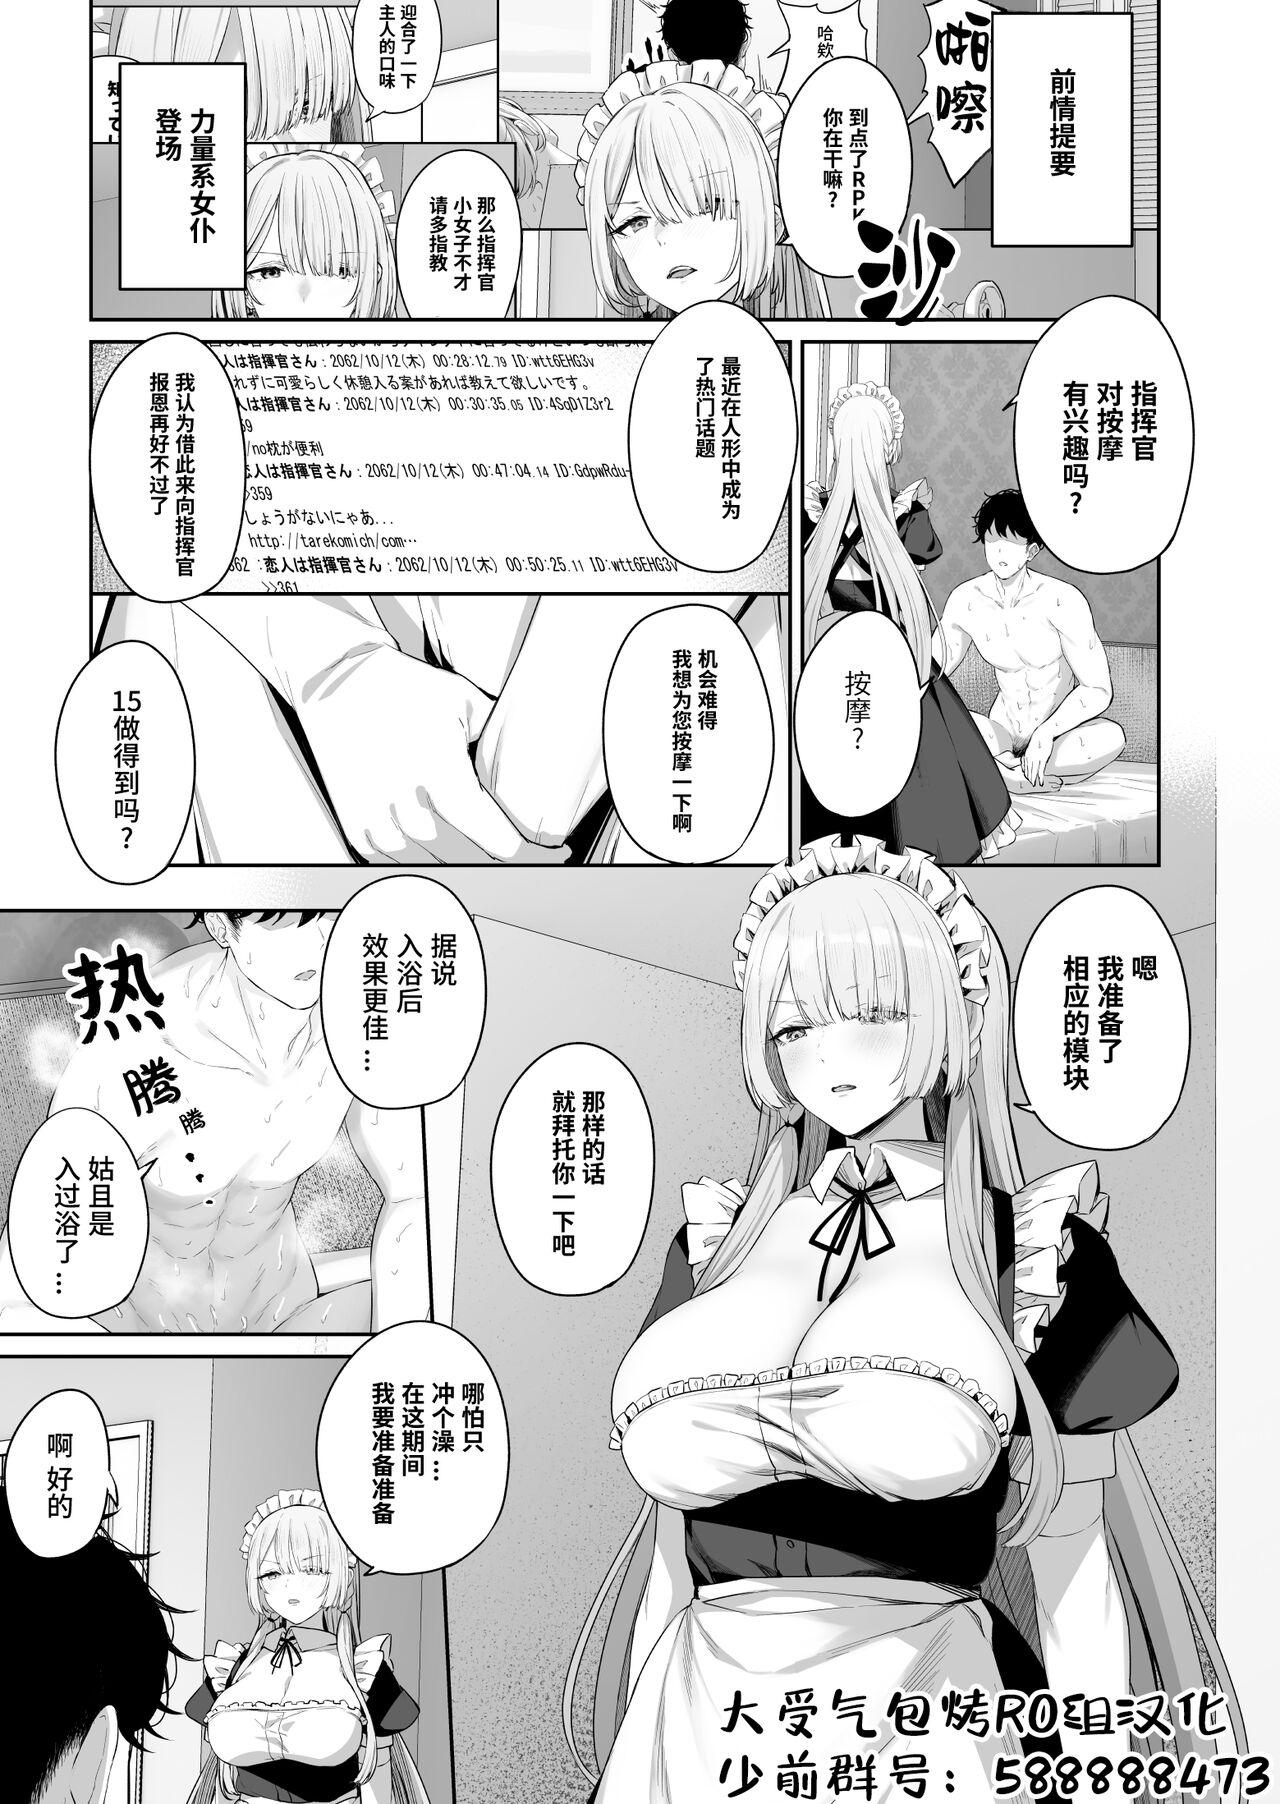 Pussyfucking AK15の進捗1 - Girls frontline Cameltoe - Page 1